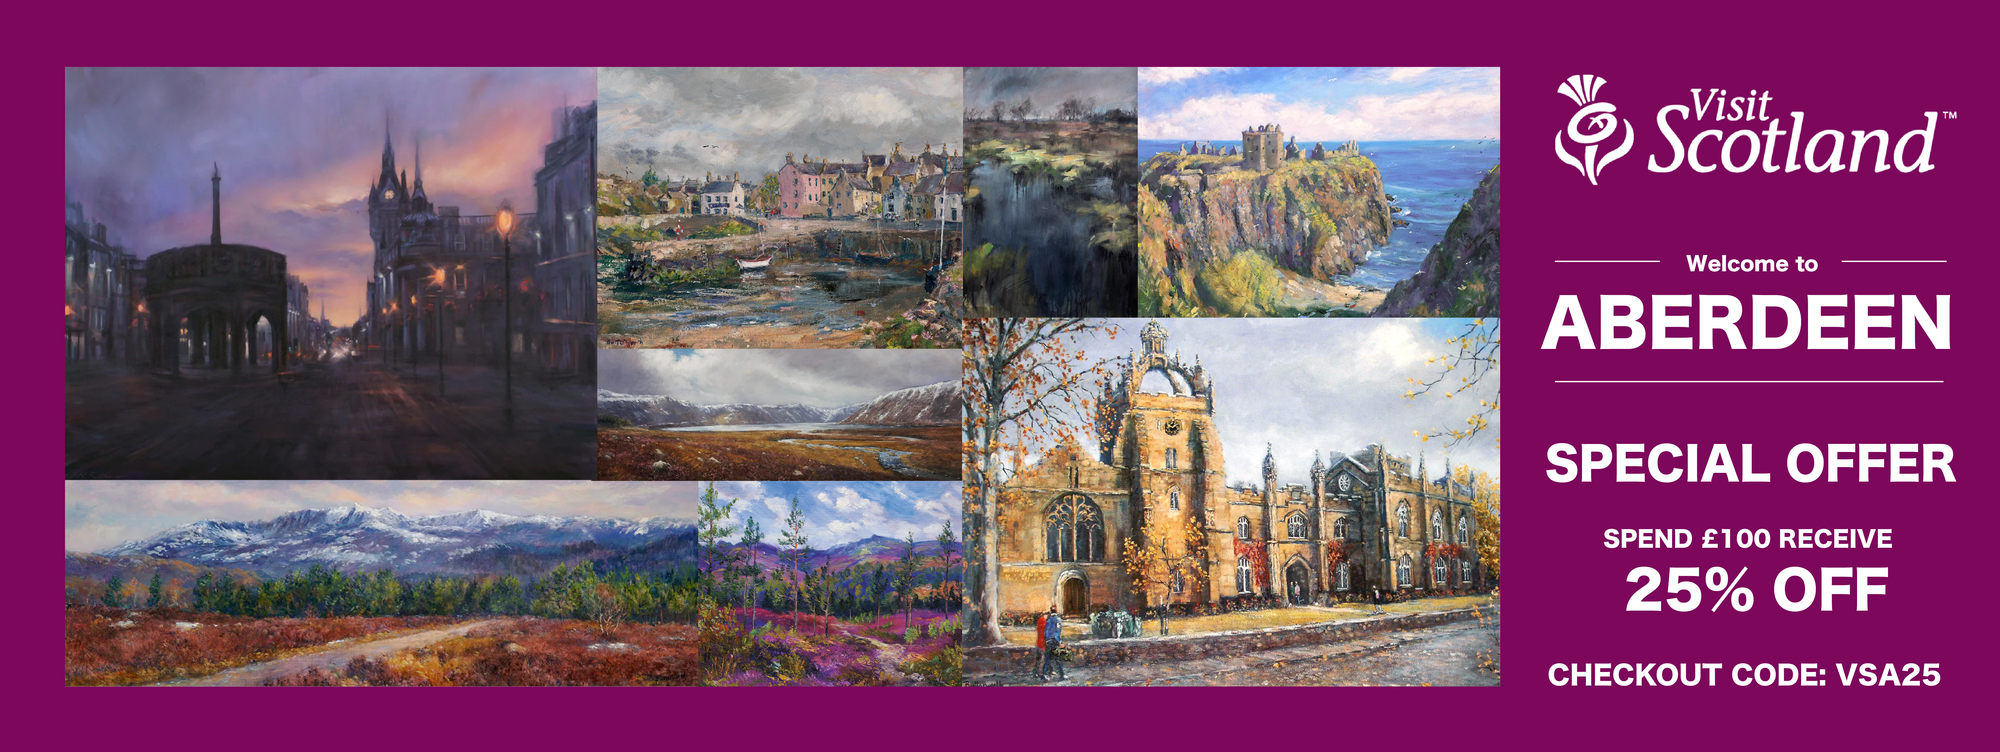 Special Scottish Art print offer from the Butterworth Gallery. use the code VSA25 to receive 25% OFF your first order with us when you spend £100 or more.